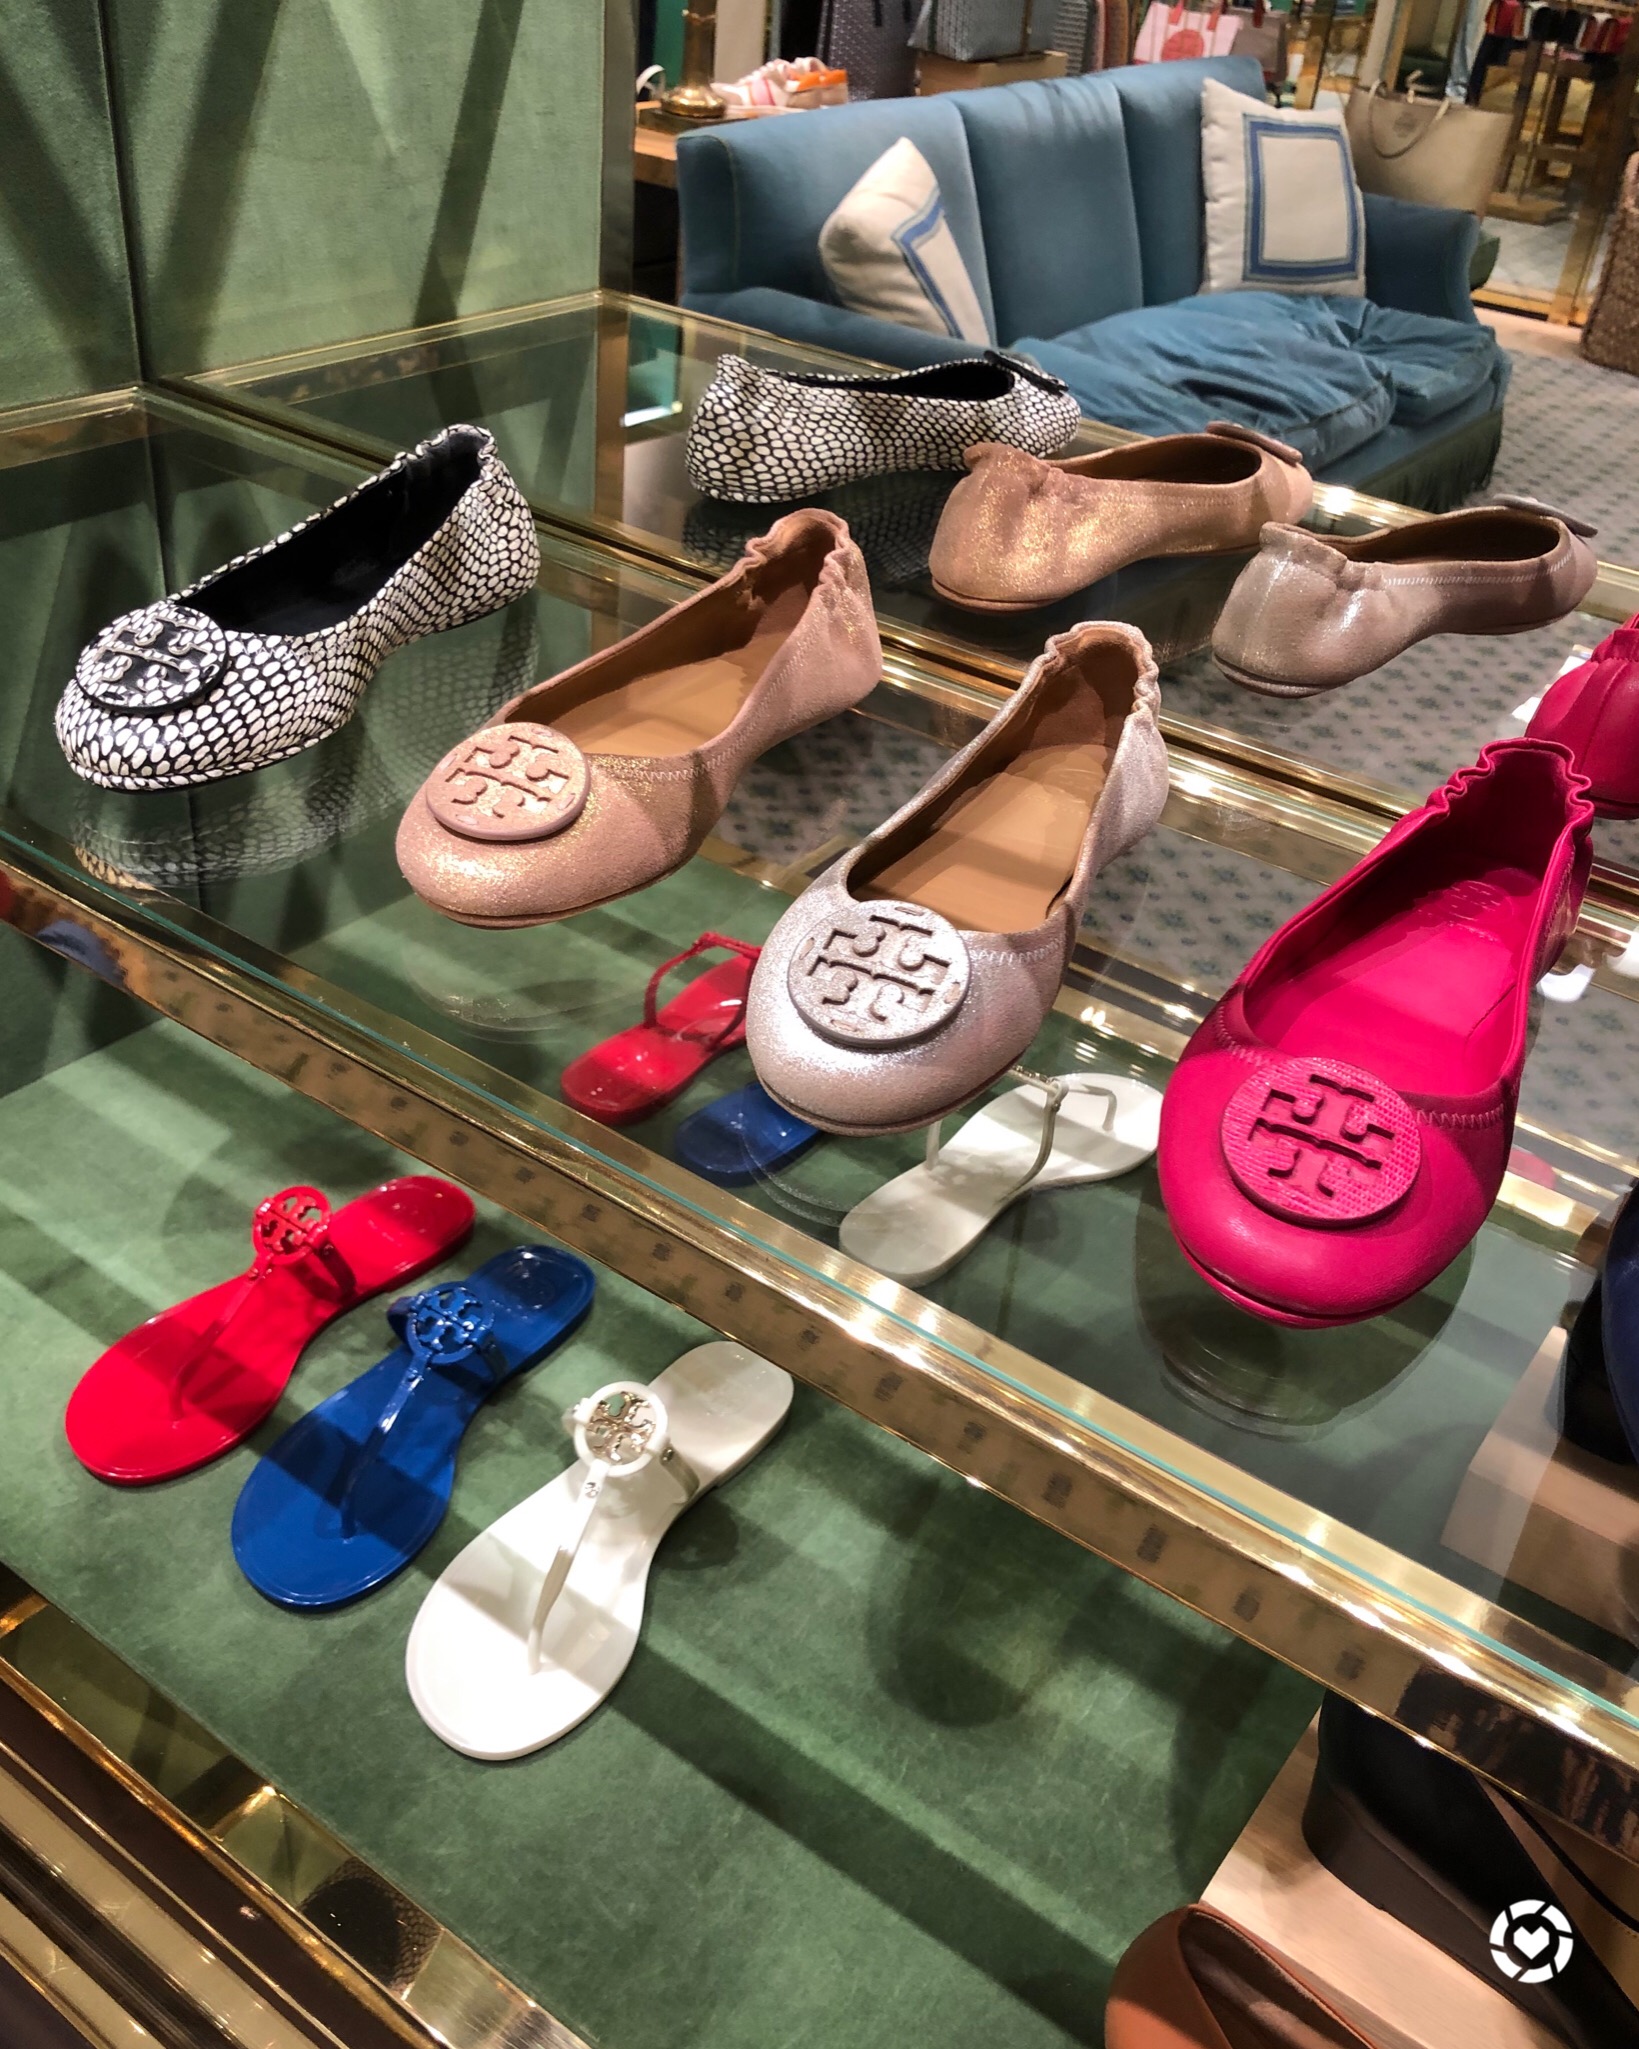 New Tory Burch Markdowns! Save Up To 40% Off + Free Shipping - The Double  Take Girls